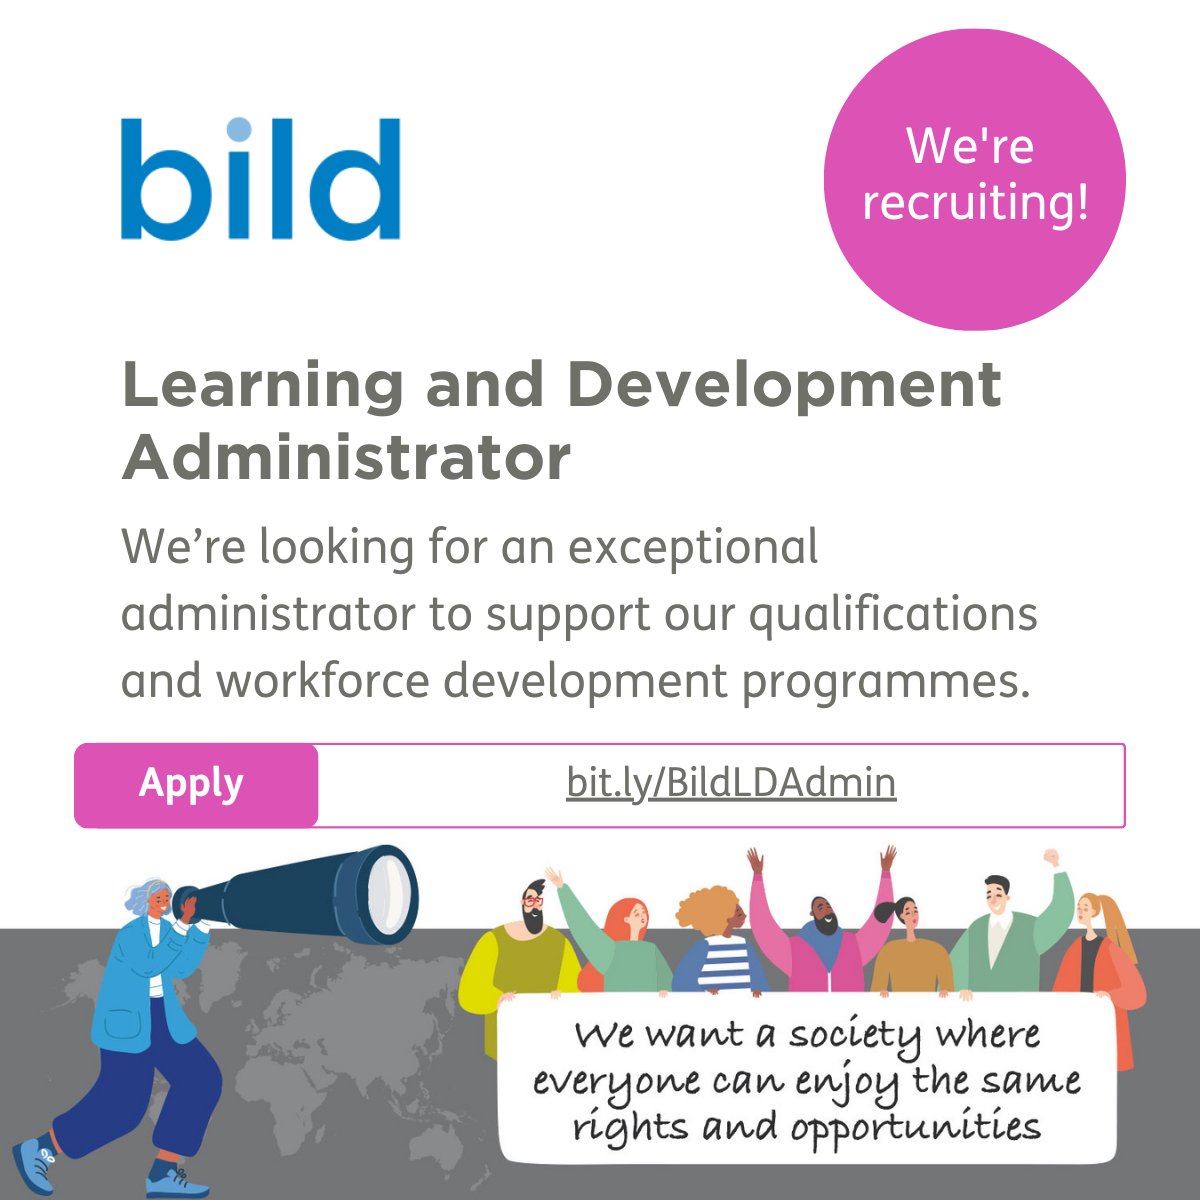 We're looking for an experienced administrator with excellent interpersonal skills to join us to Bild's workforce development and qualifications activity. Find out more at bit.ly/BildLDAdmin